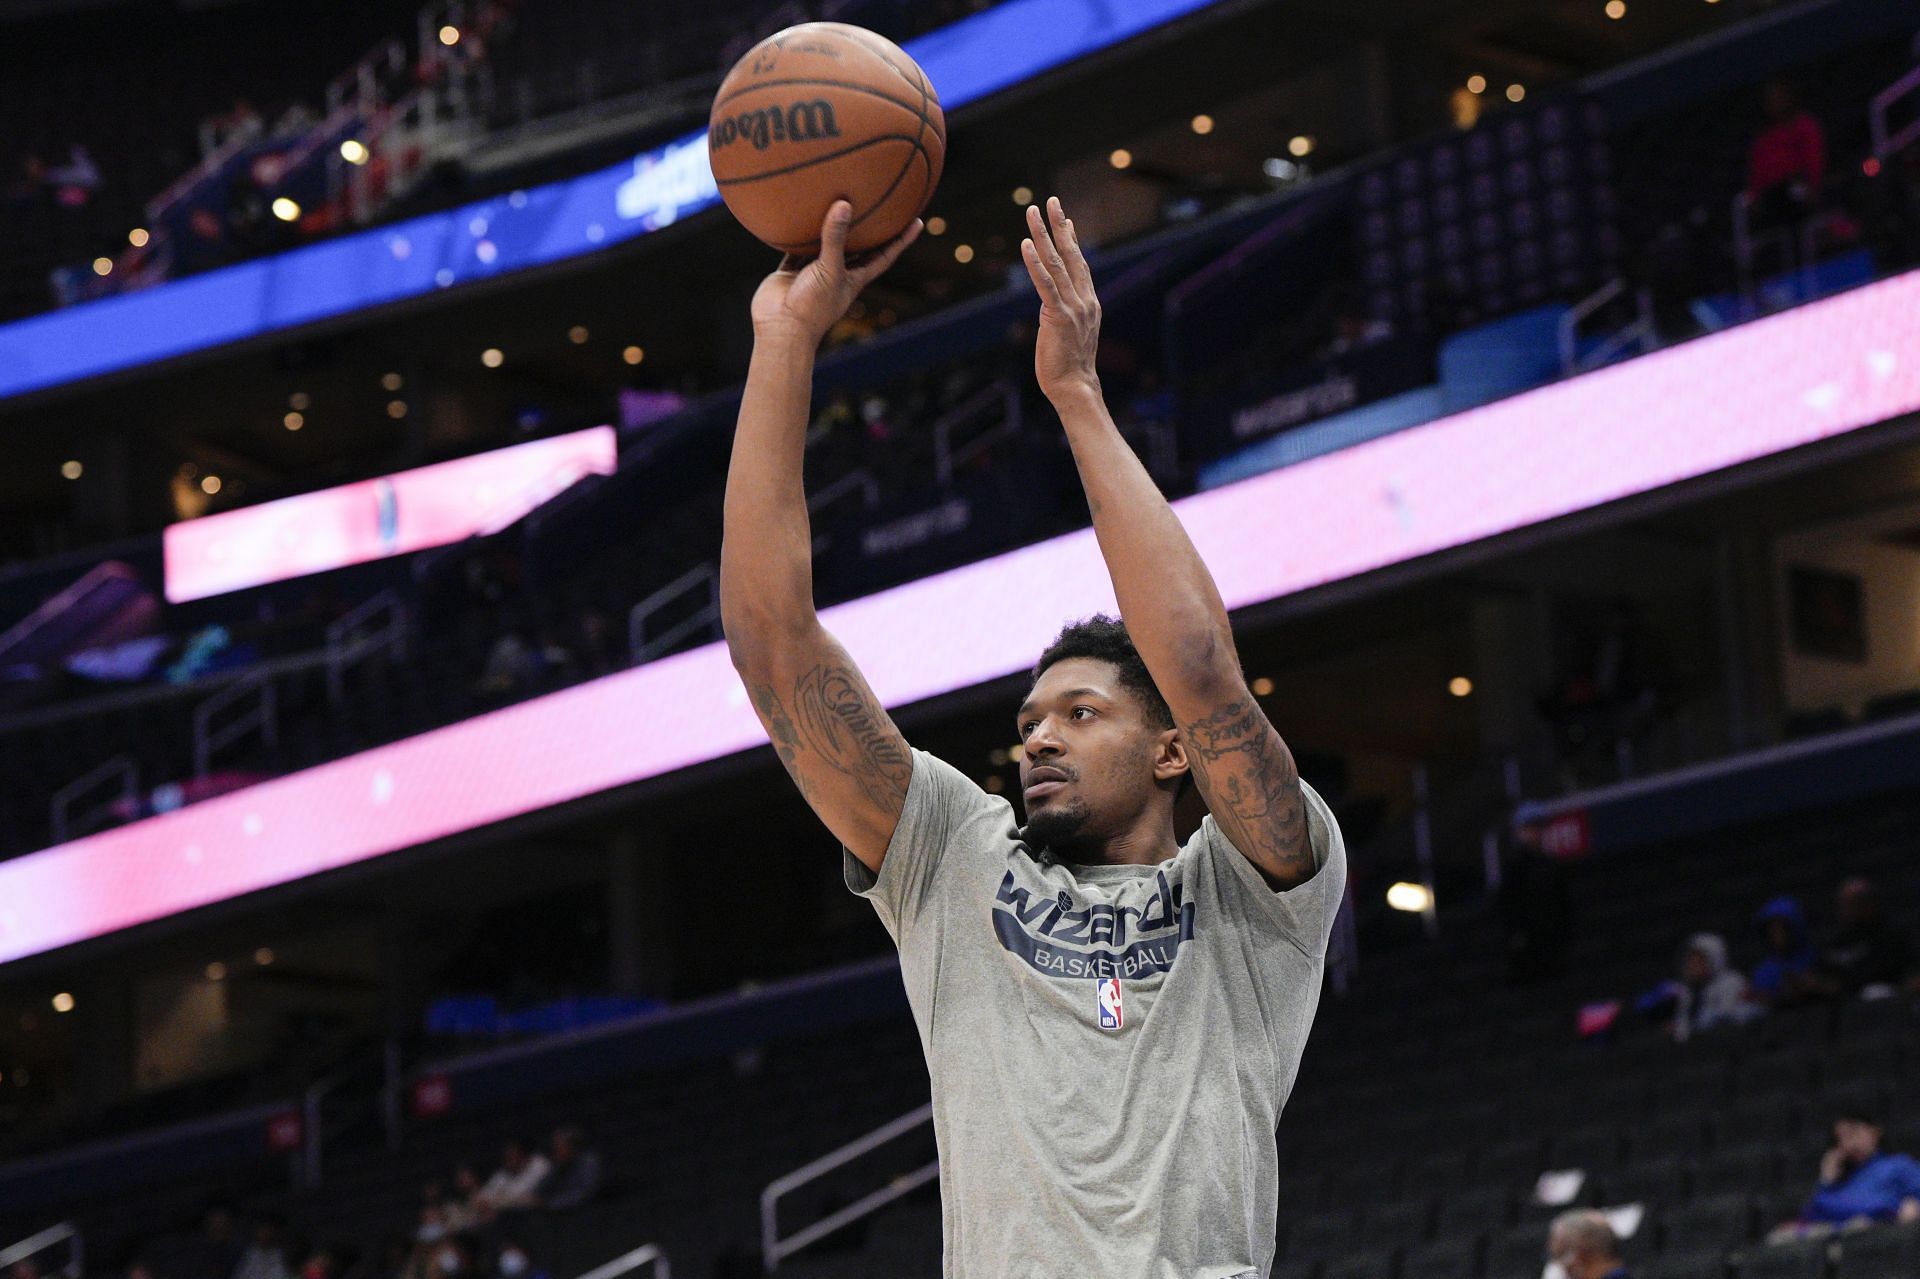 Bradley Beal has been upgraded to questionable tonight for the Washington Wizards.